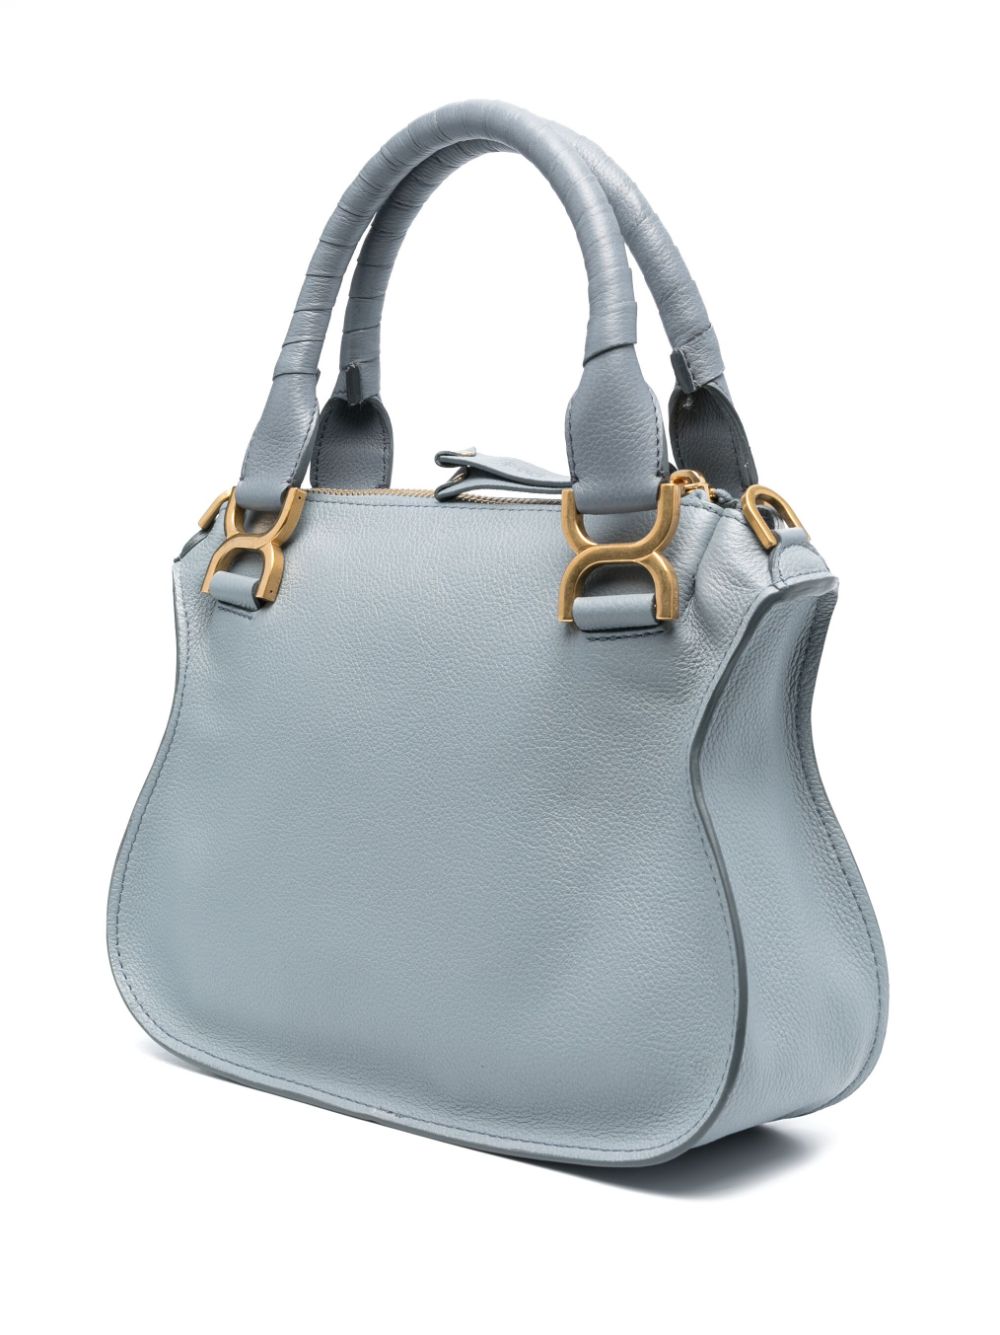 CHLOÉ Small Marcie Light Blue Leather Tote Handbag with Gold-Tone Hardware